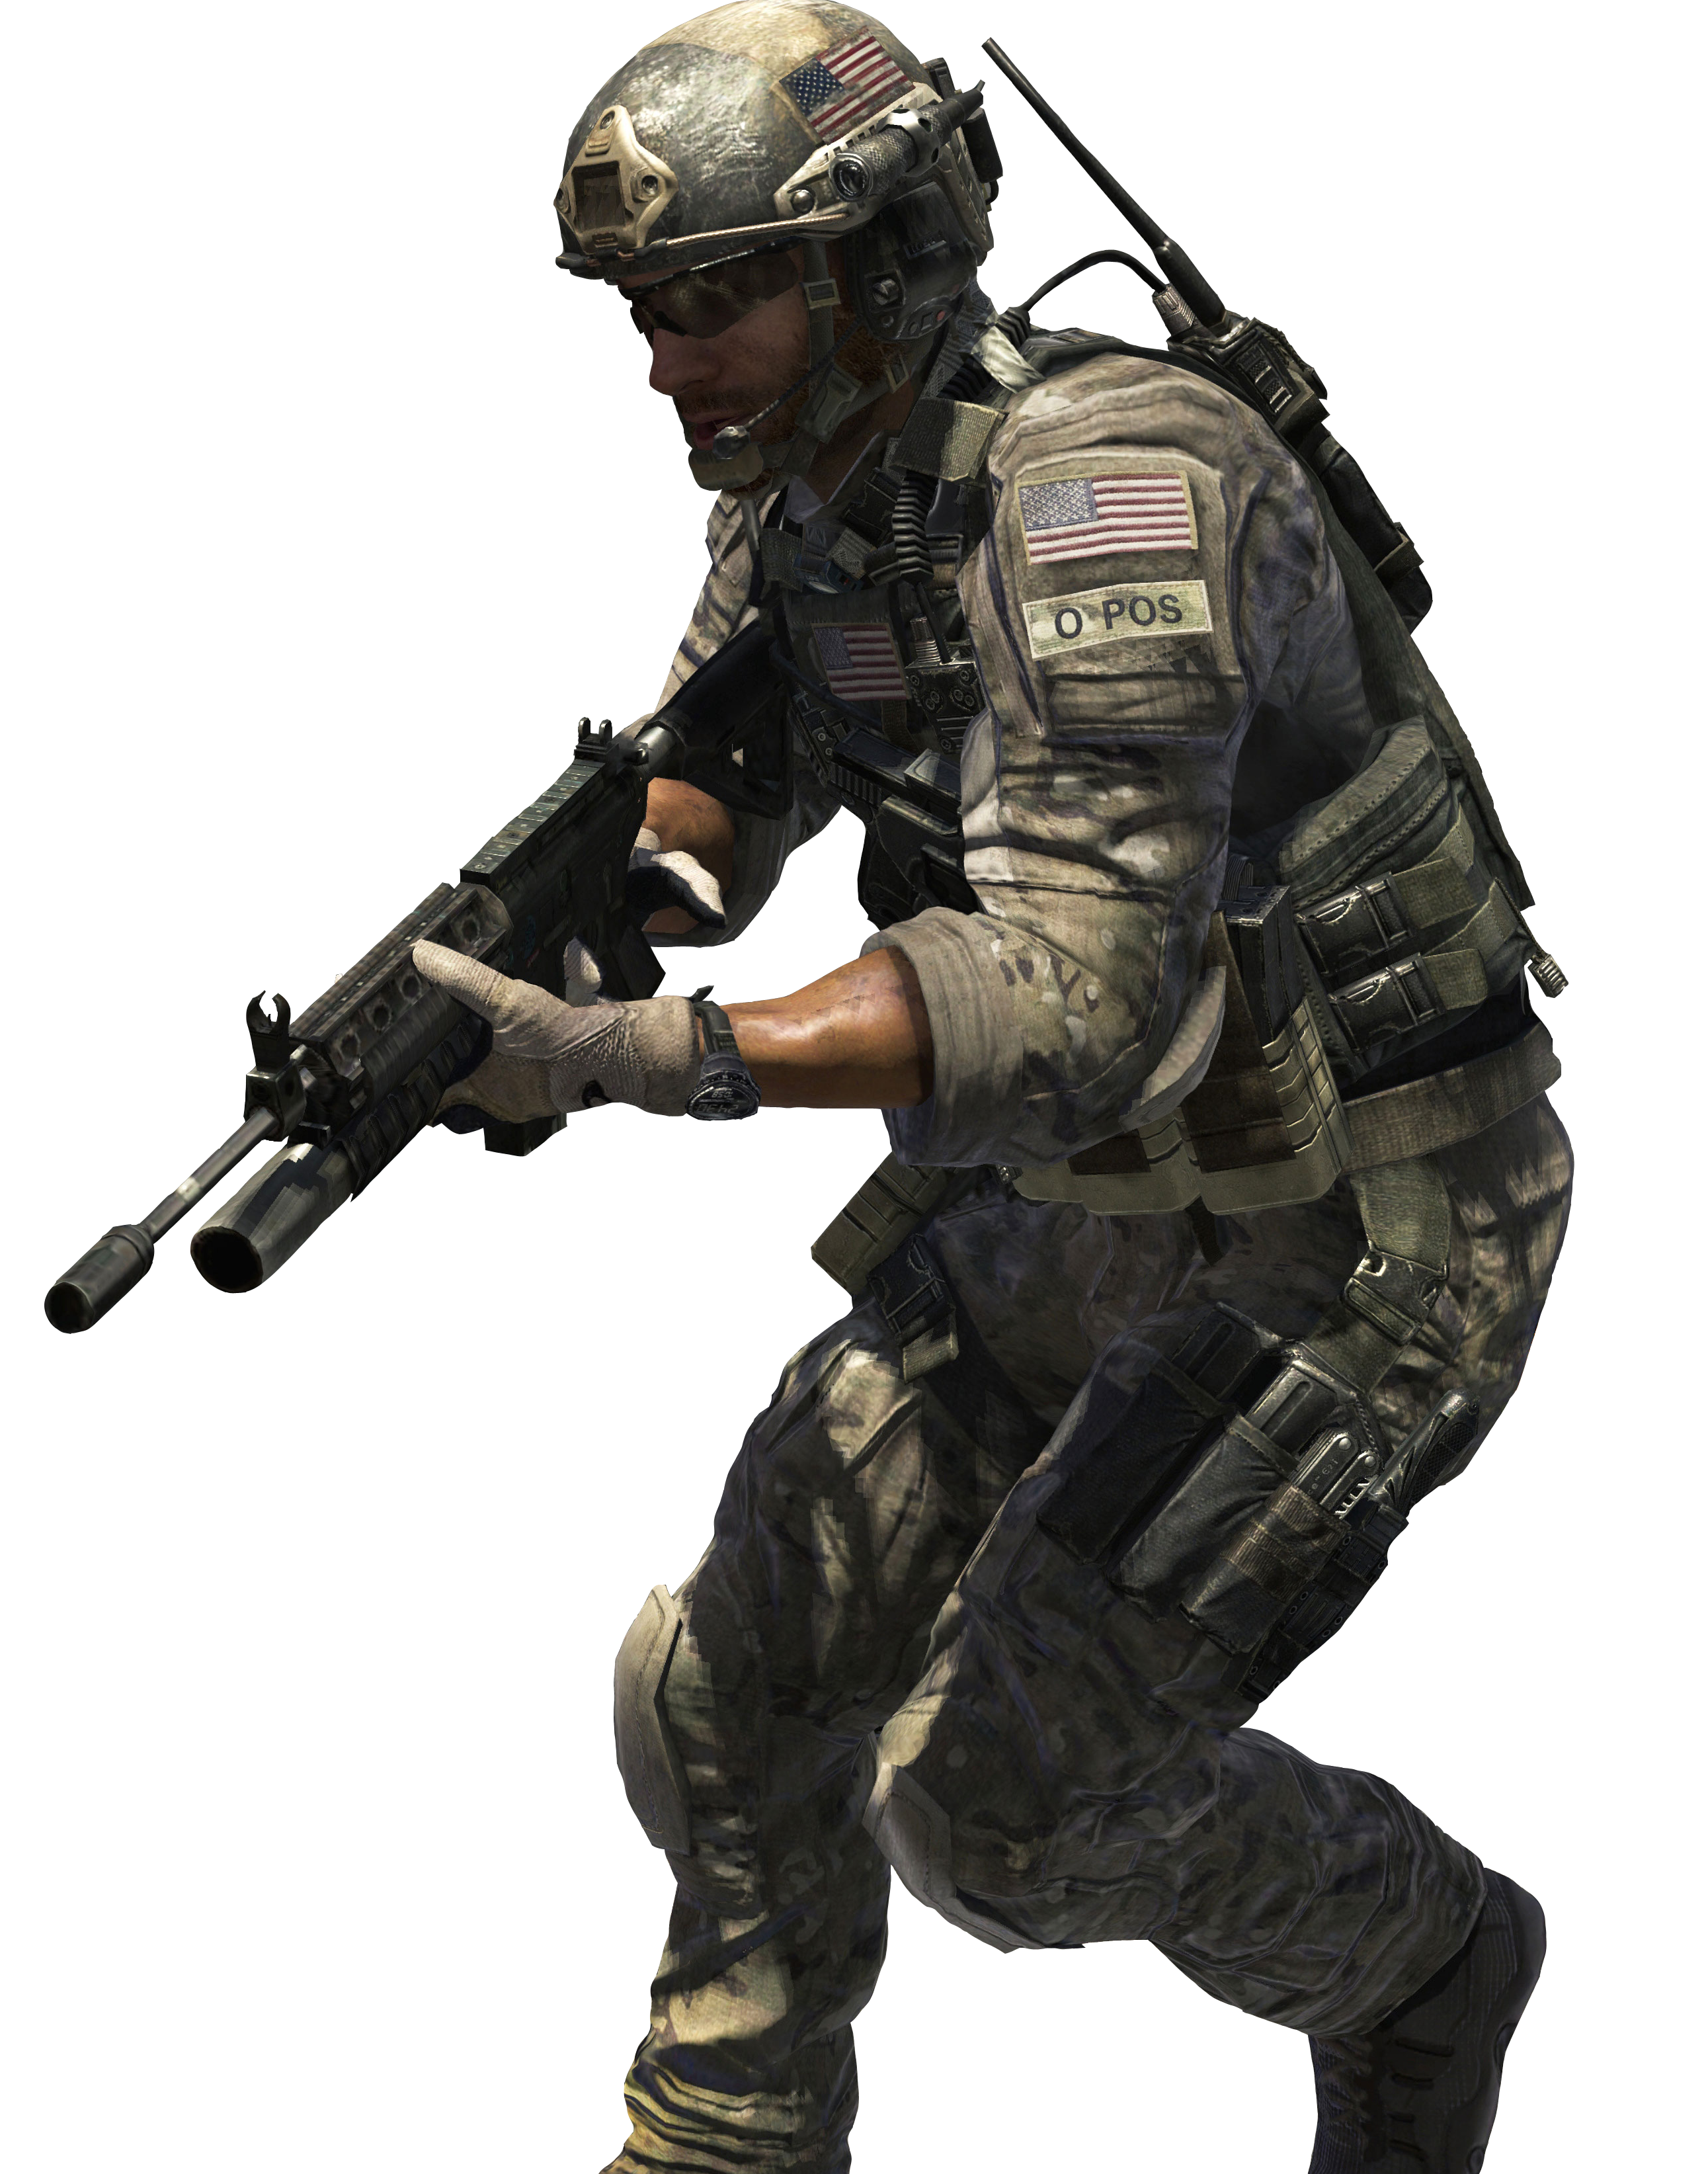 File:BF2 M4 Soldier.png